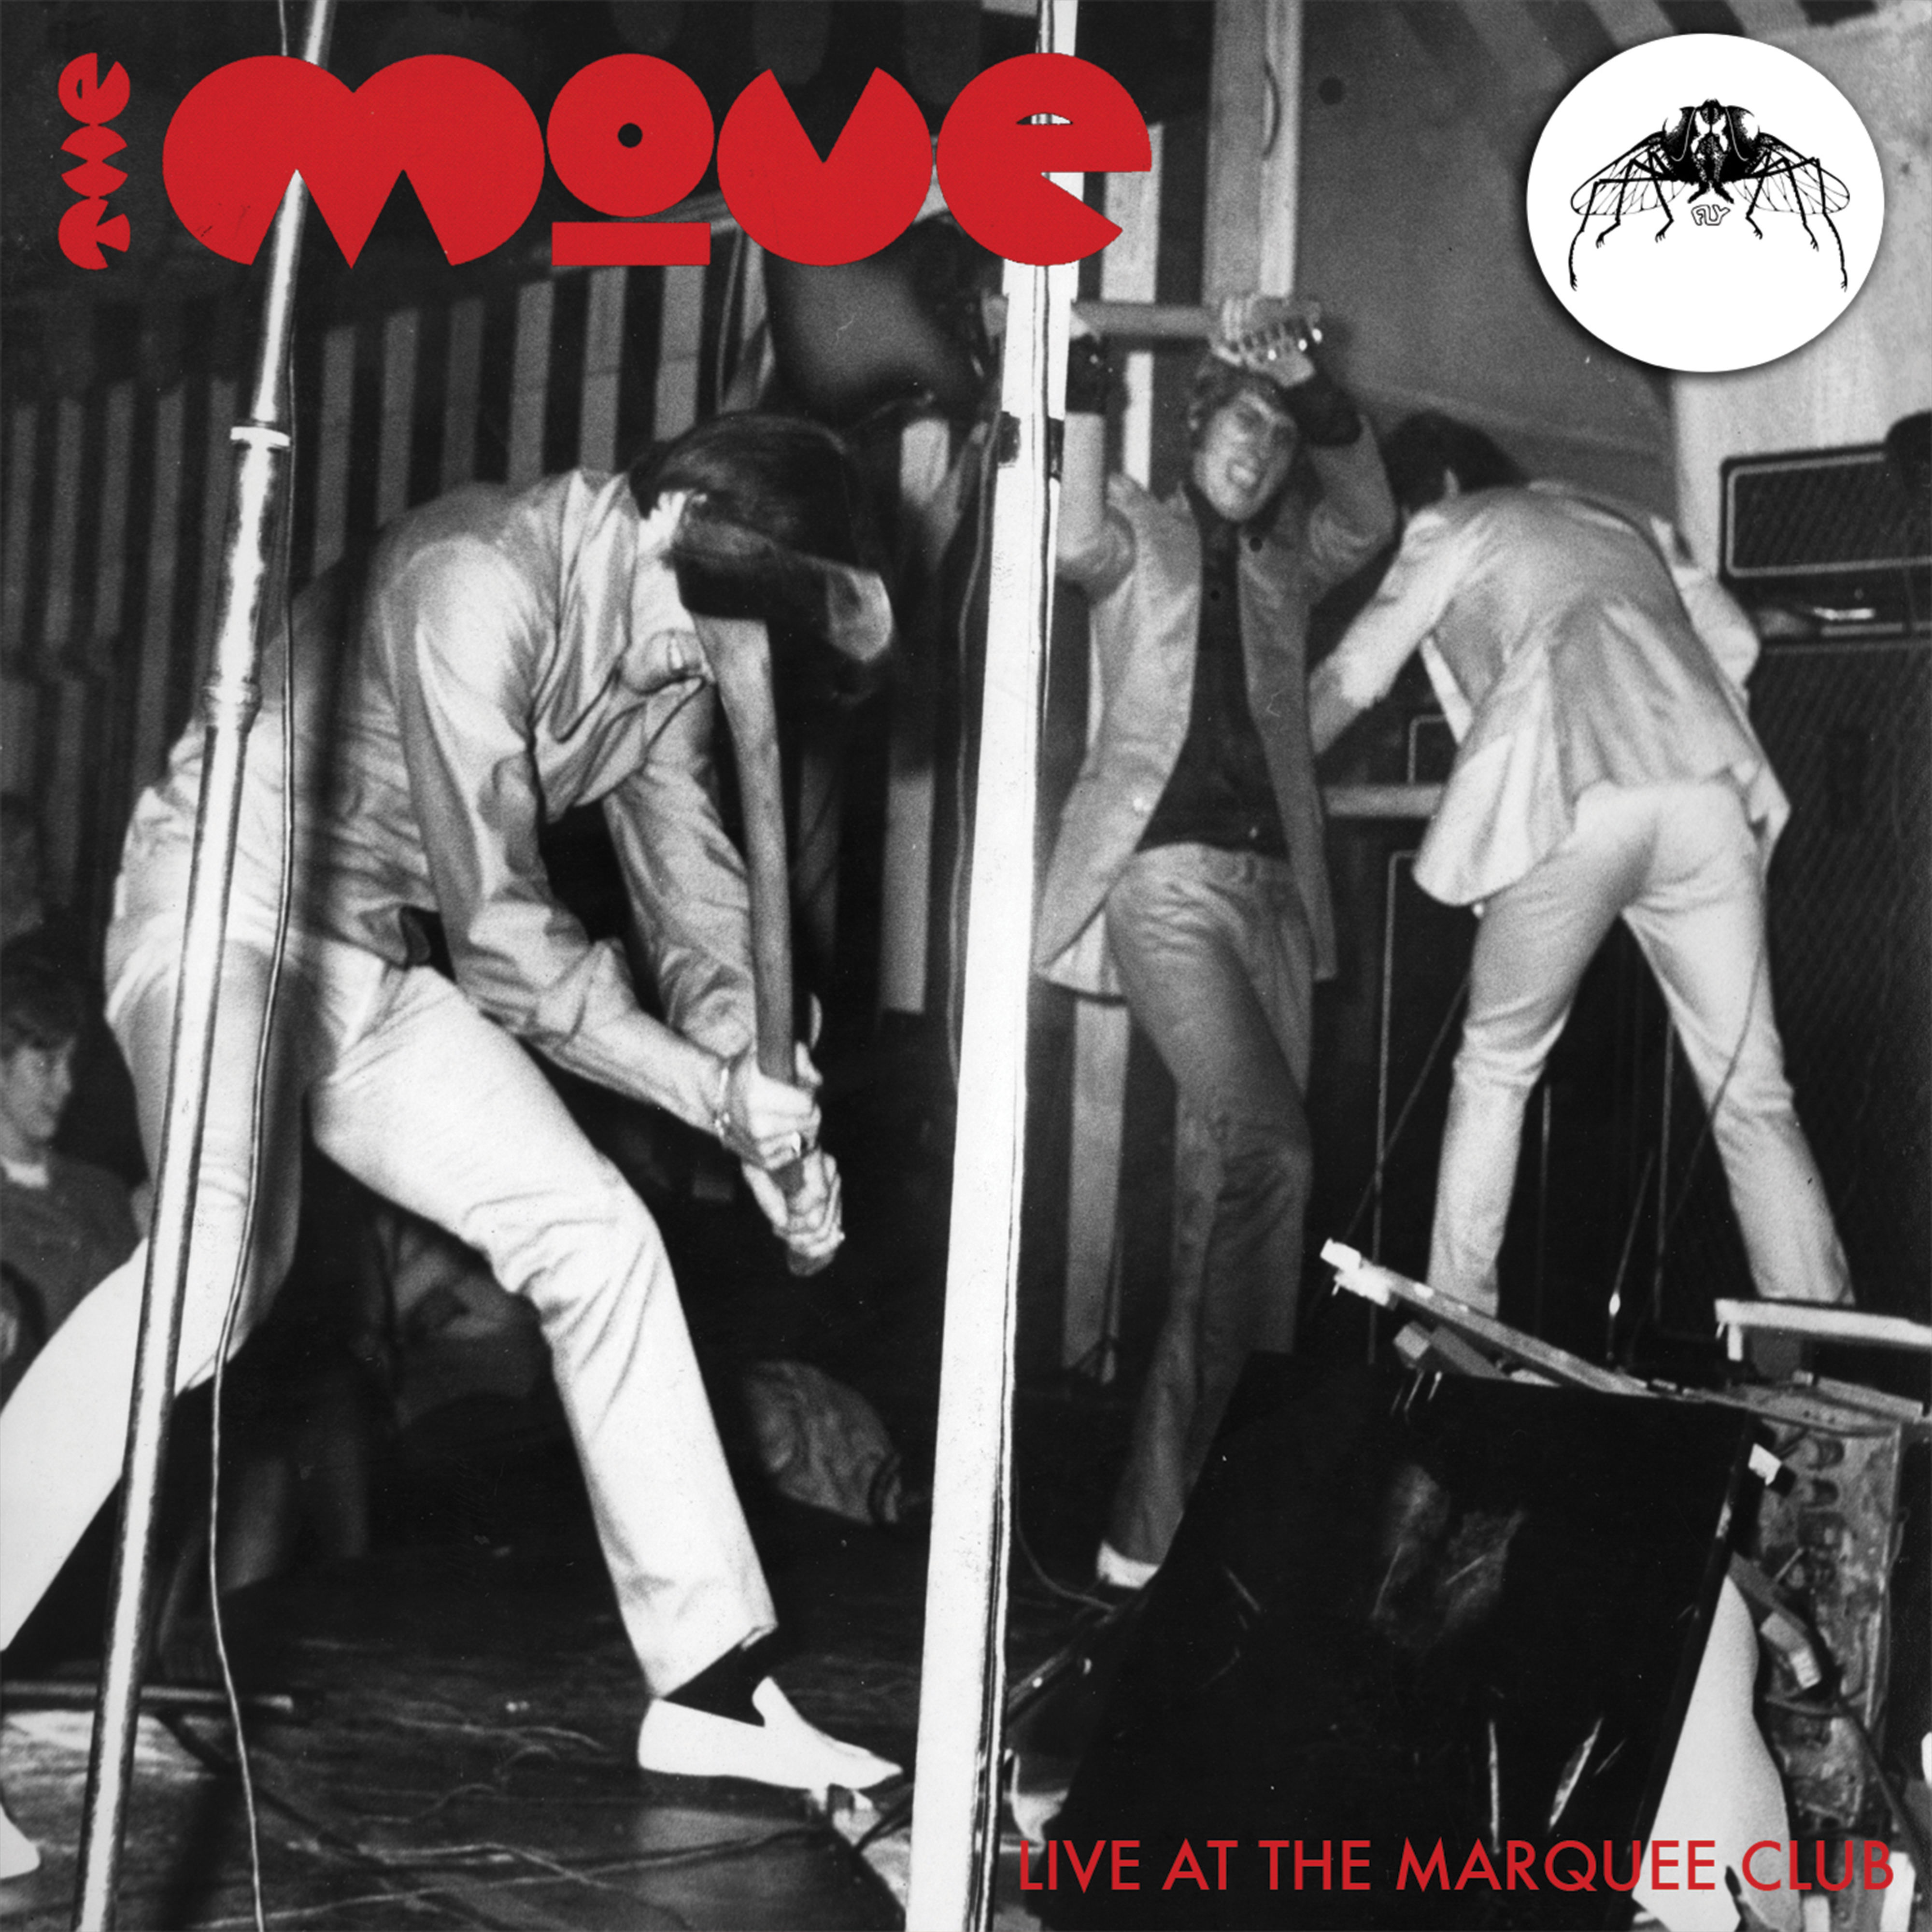 Live at The Marquee Club [Stereo]